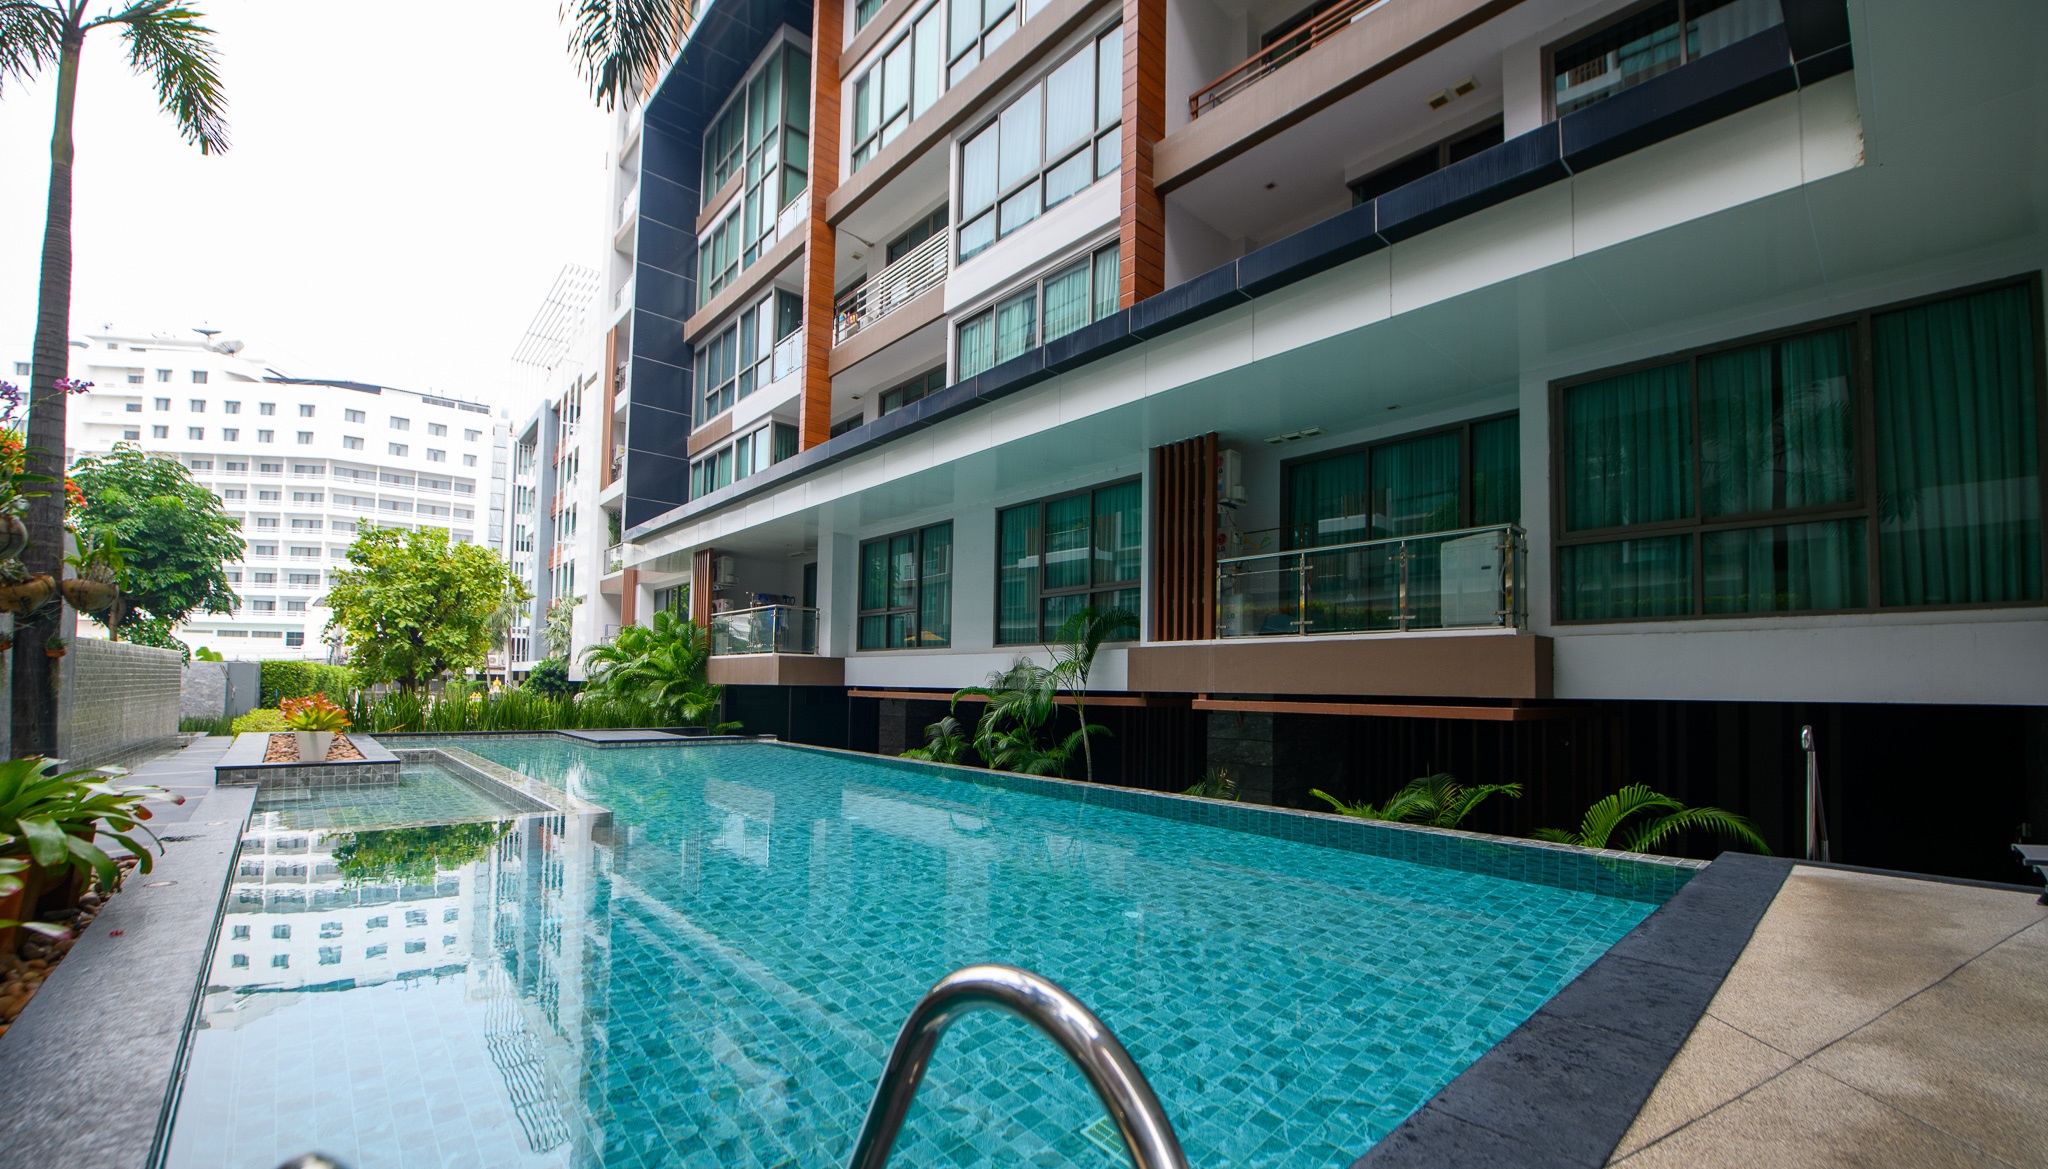 Lowest price 1 Bed EVER SEEN @ The URBAN Pattaya Thailand